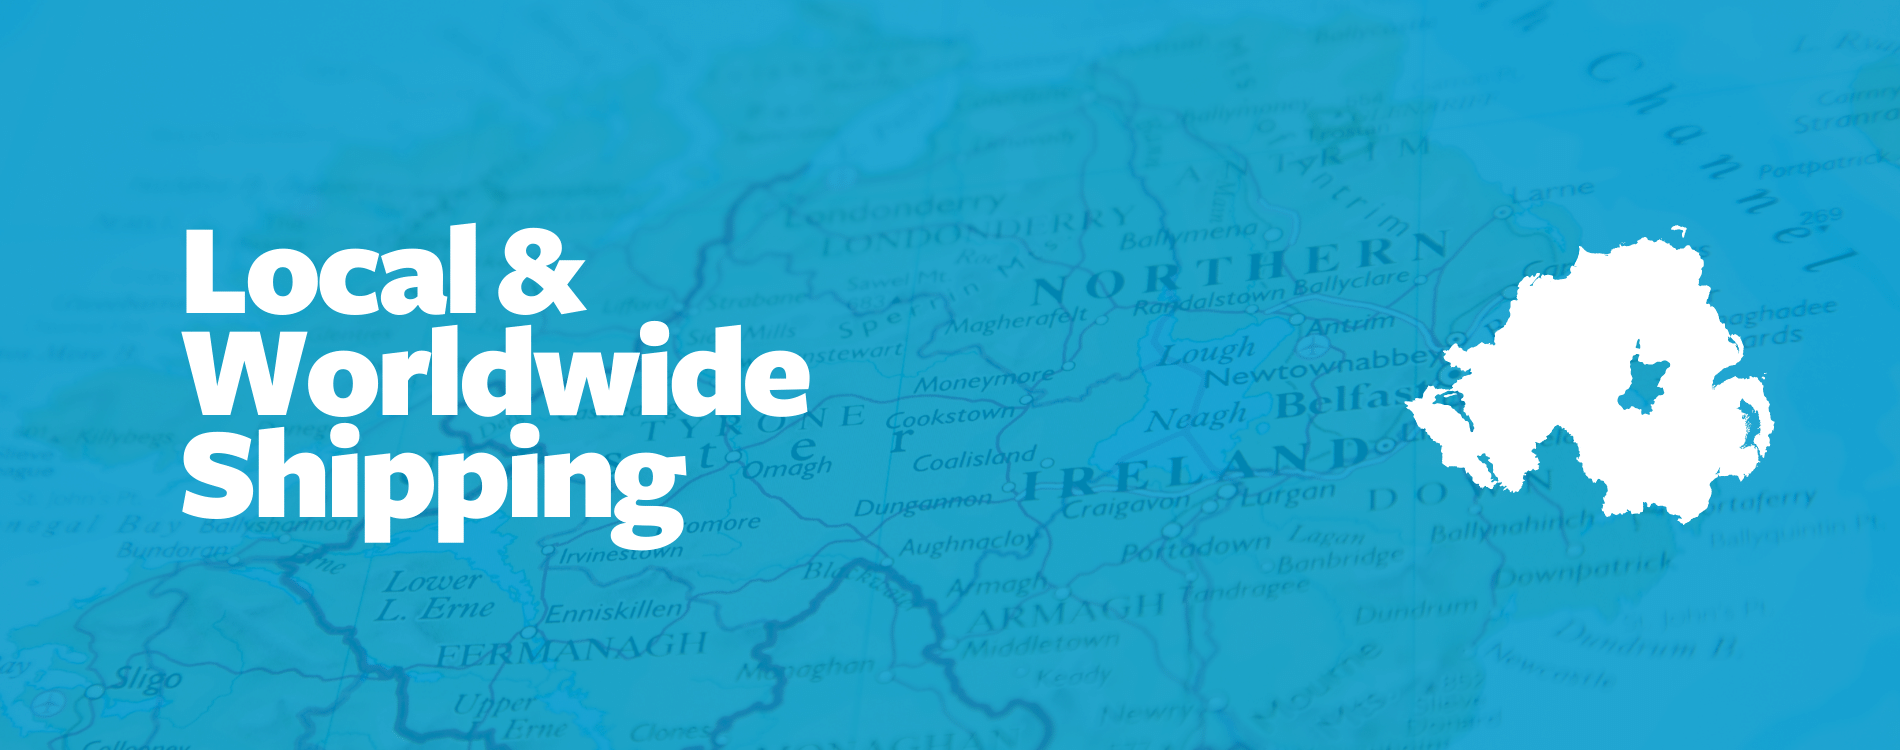 Local & Worldwide Shipping | NI Parcels